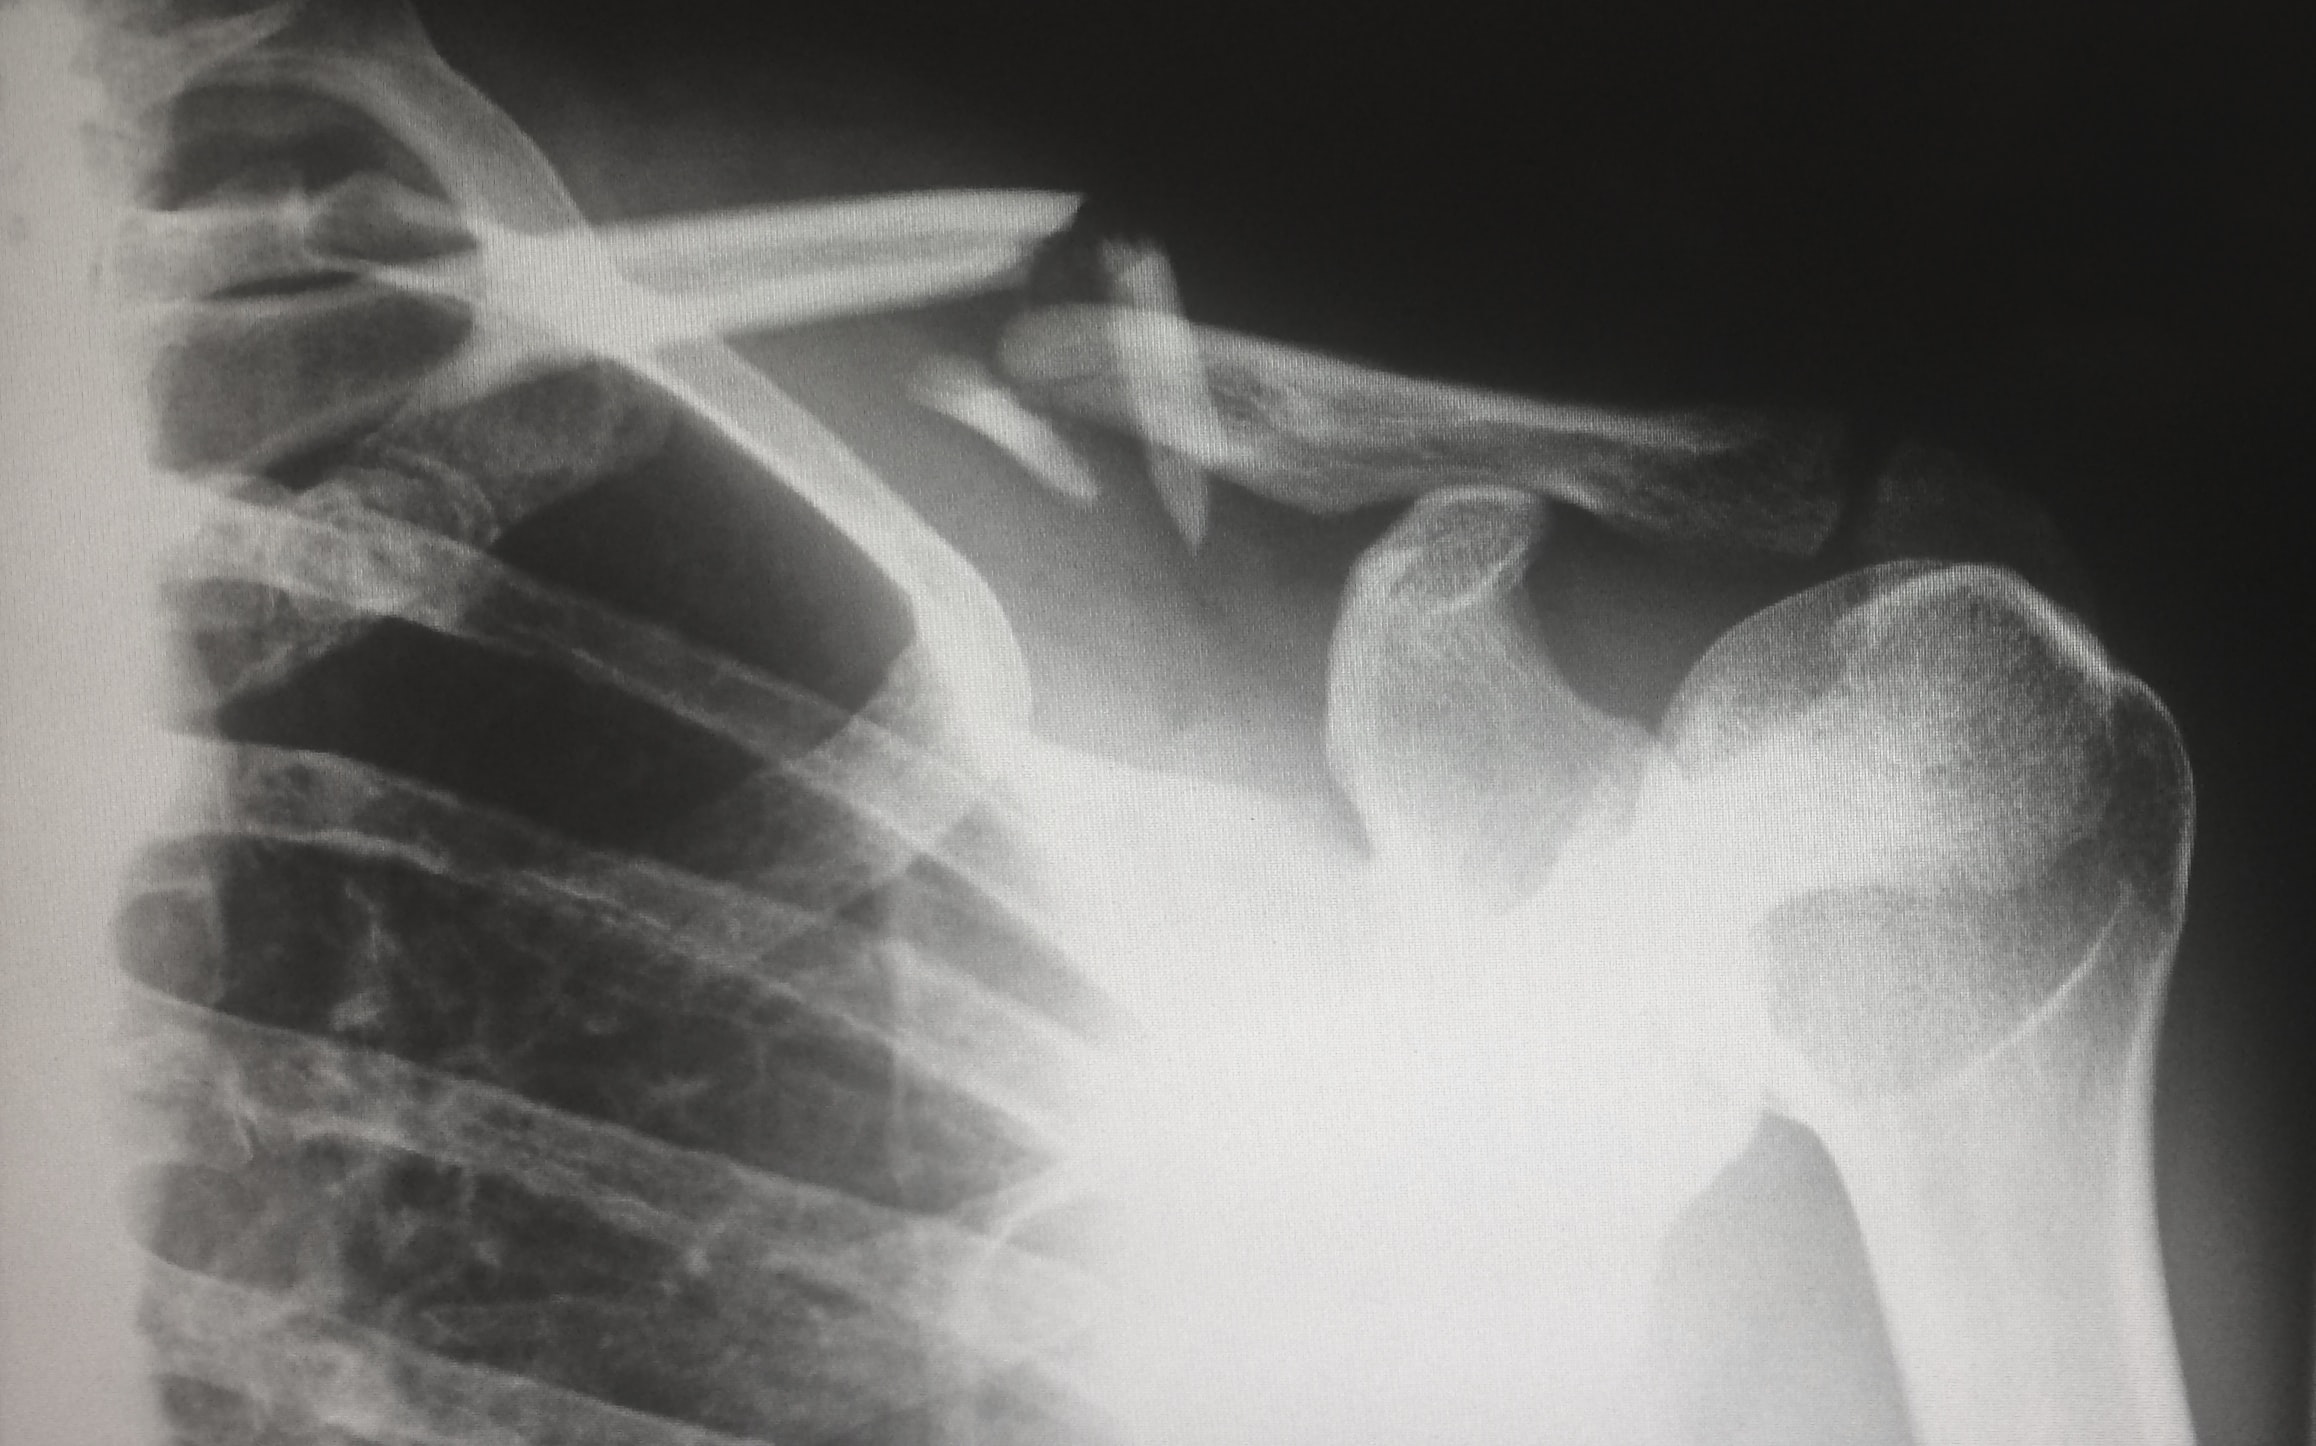 Broken Bone X-Ray Image at 2100 Webster Medical Office Building in San Francisco's Pacific Heights neighborhood